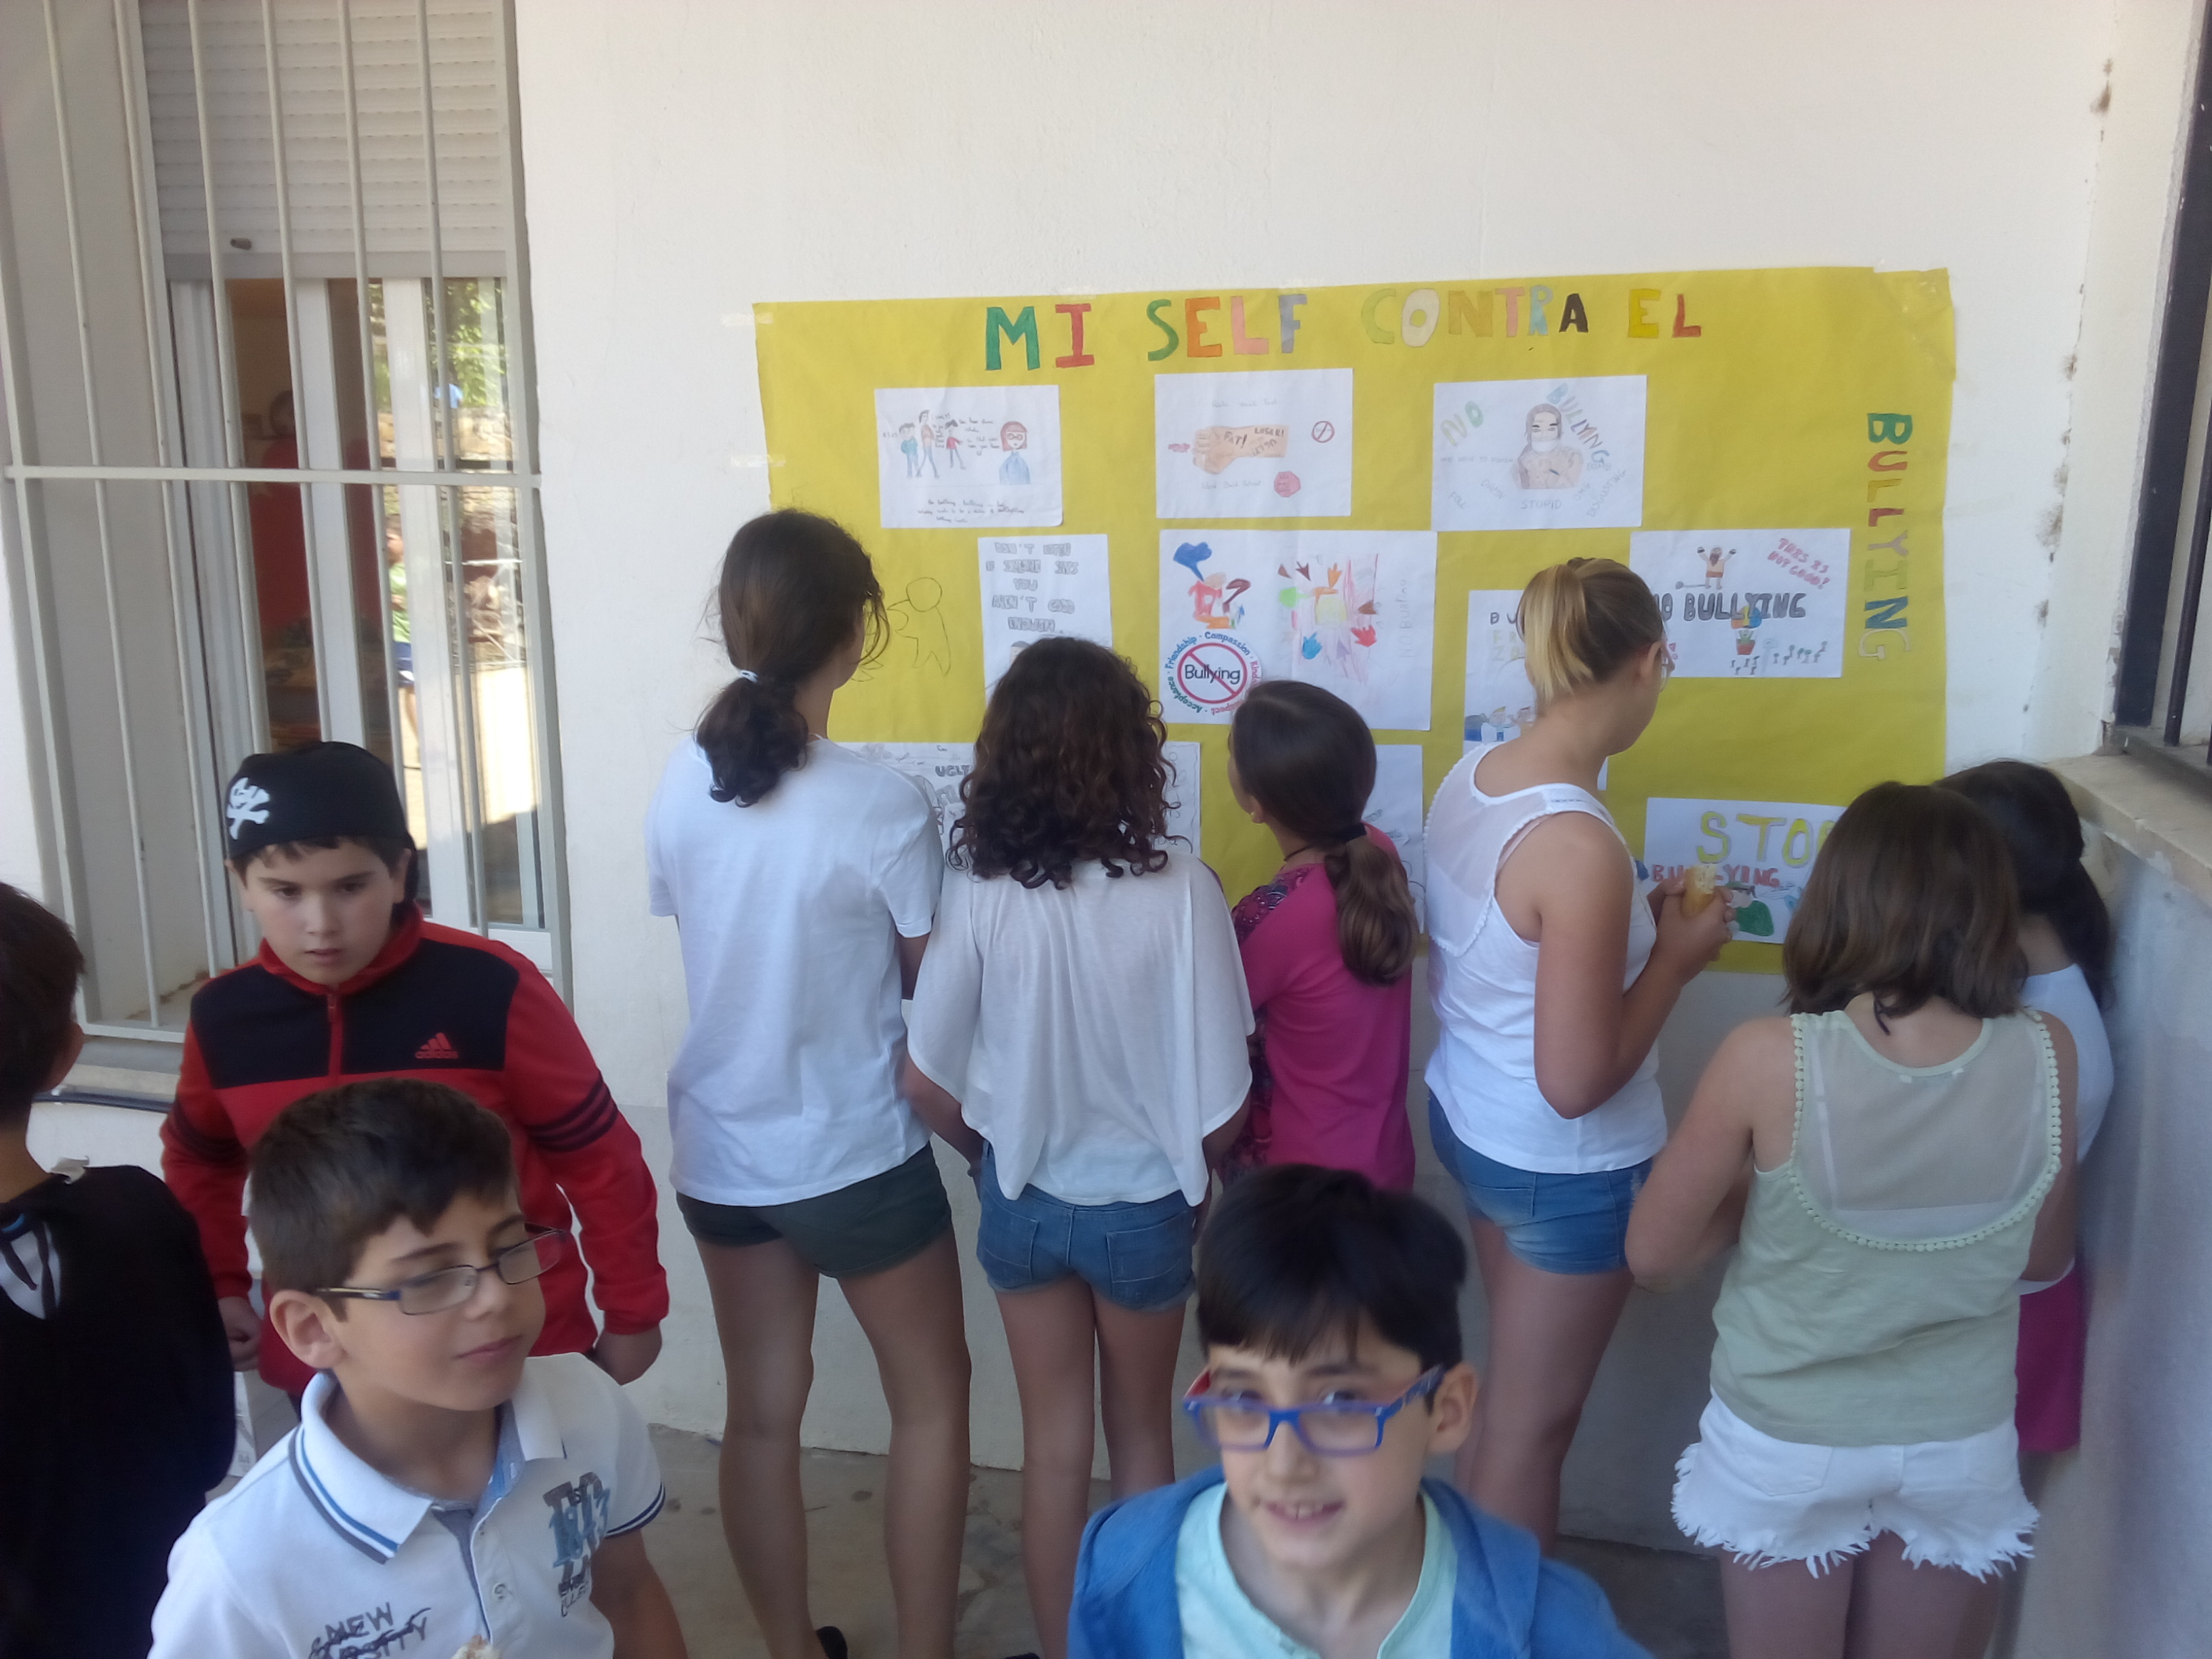 Exhibition of collaborative posters against bullying in the playground